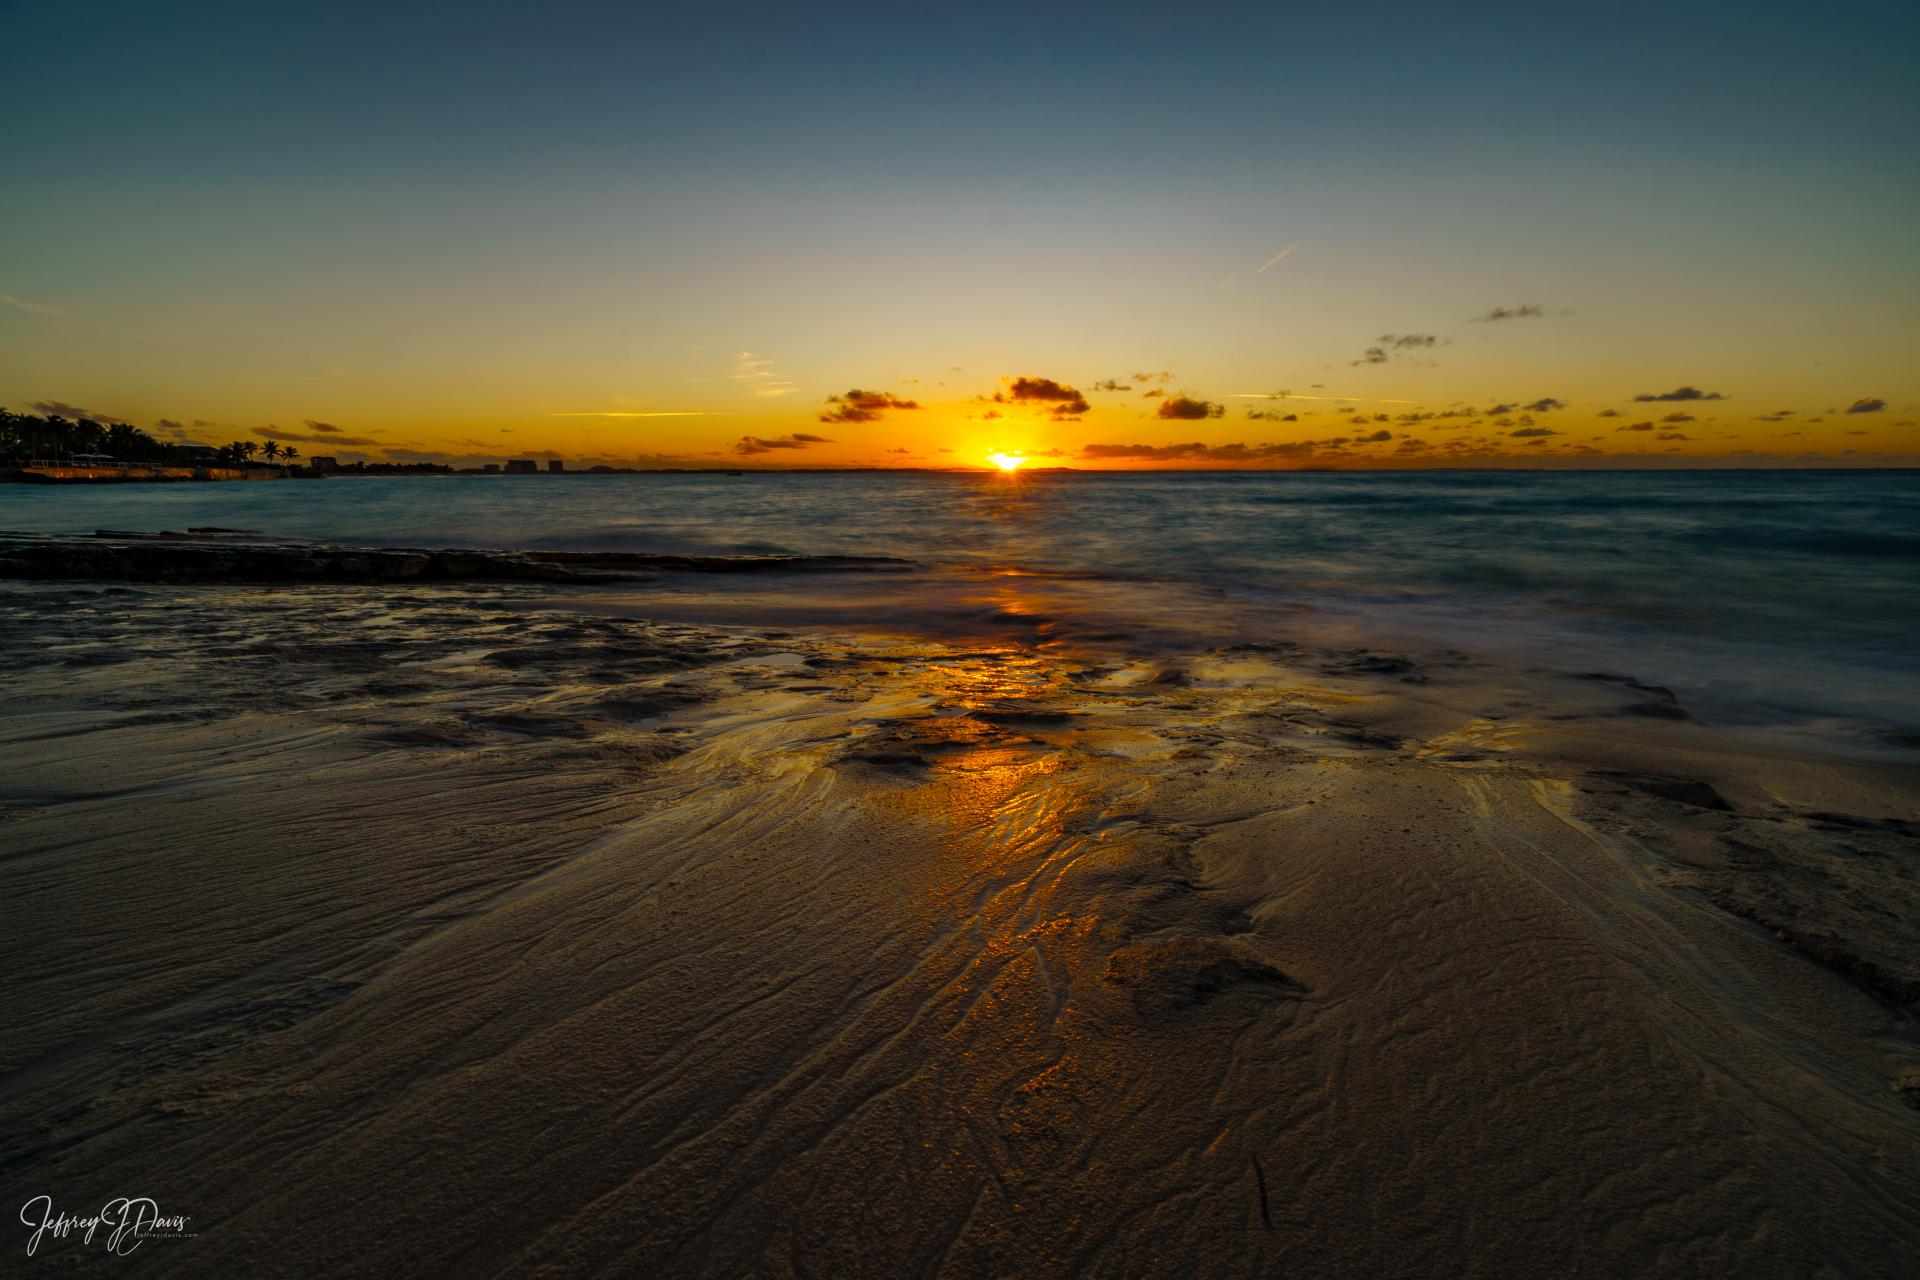 Sunset from Pelican Beach, Grace Bay, Turks and Caicos